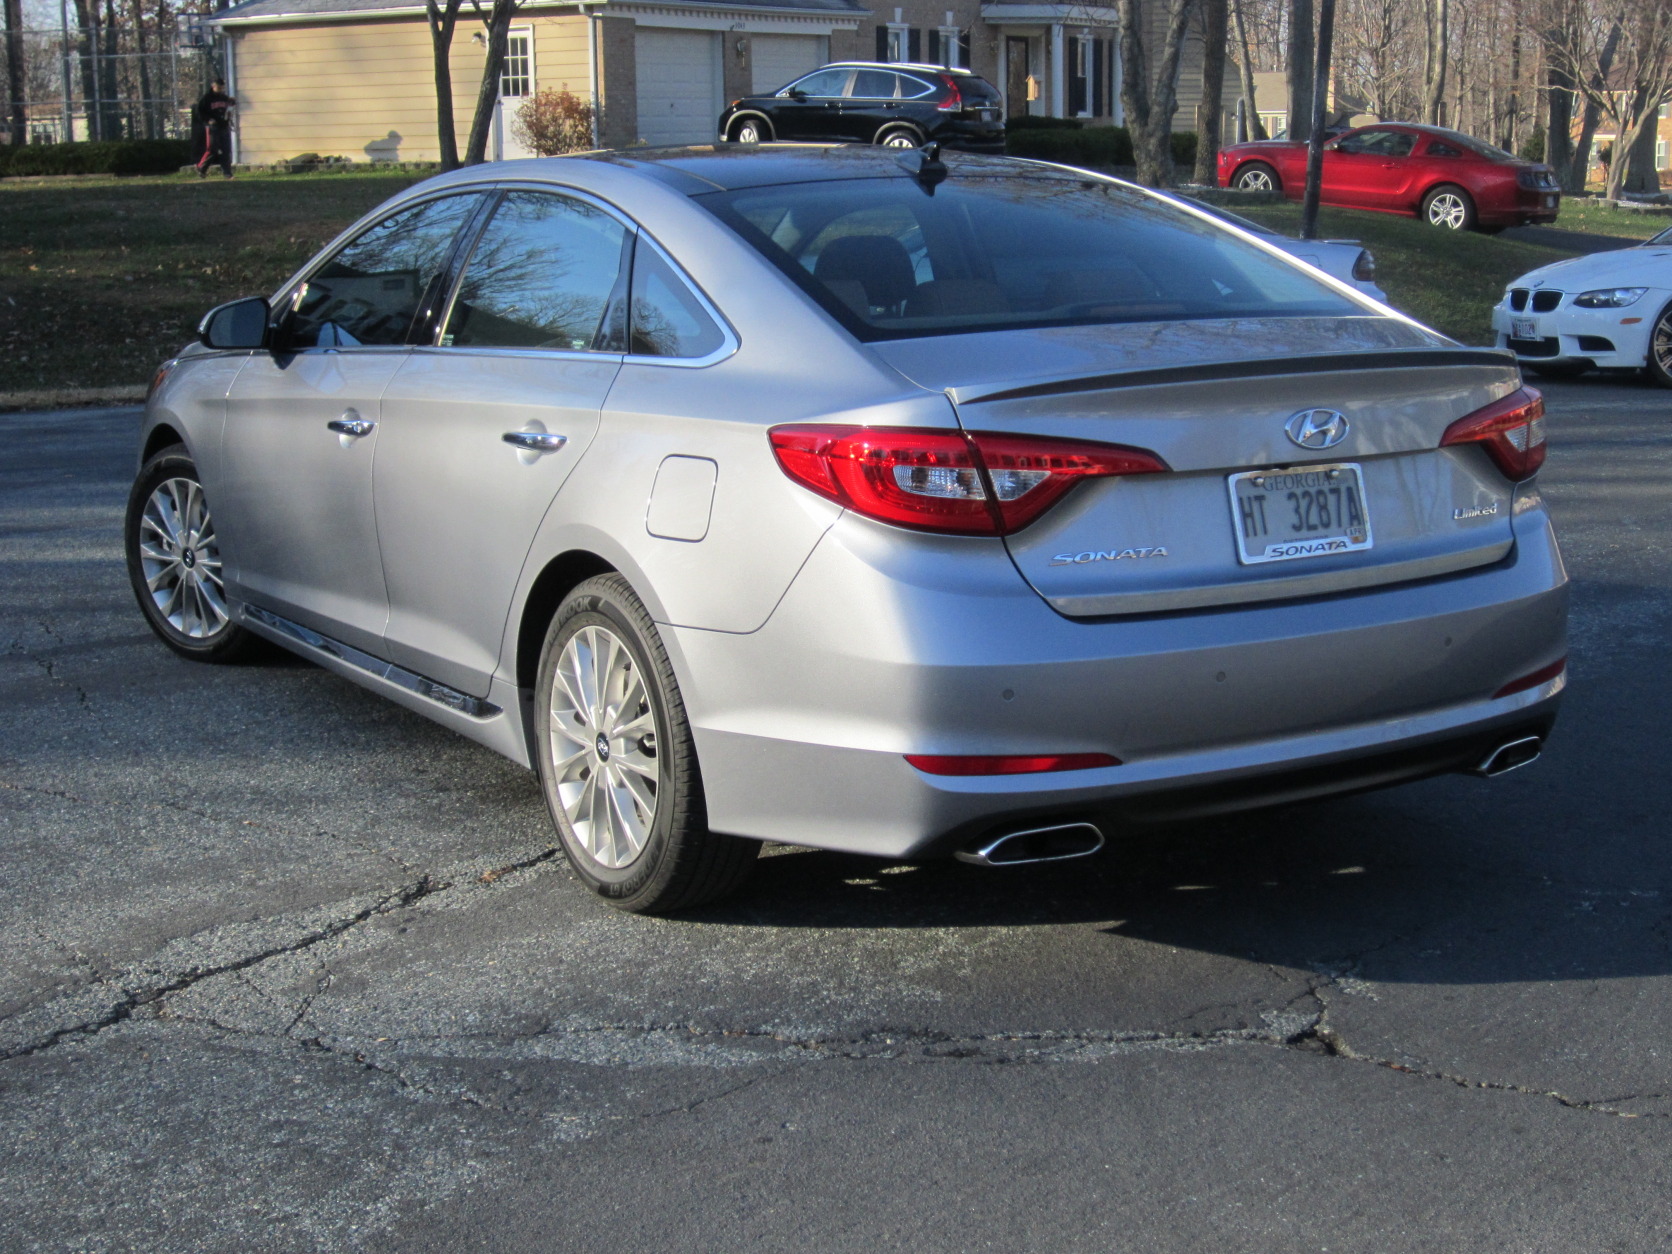 For 2015, Hyundai toned down the styling, keeping it handsome with a more conservative look to better fit in the mid-size sedan market. (WTOP/Mike Parris)